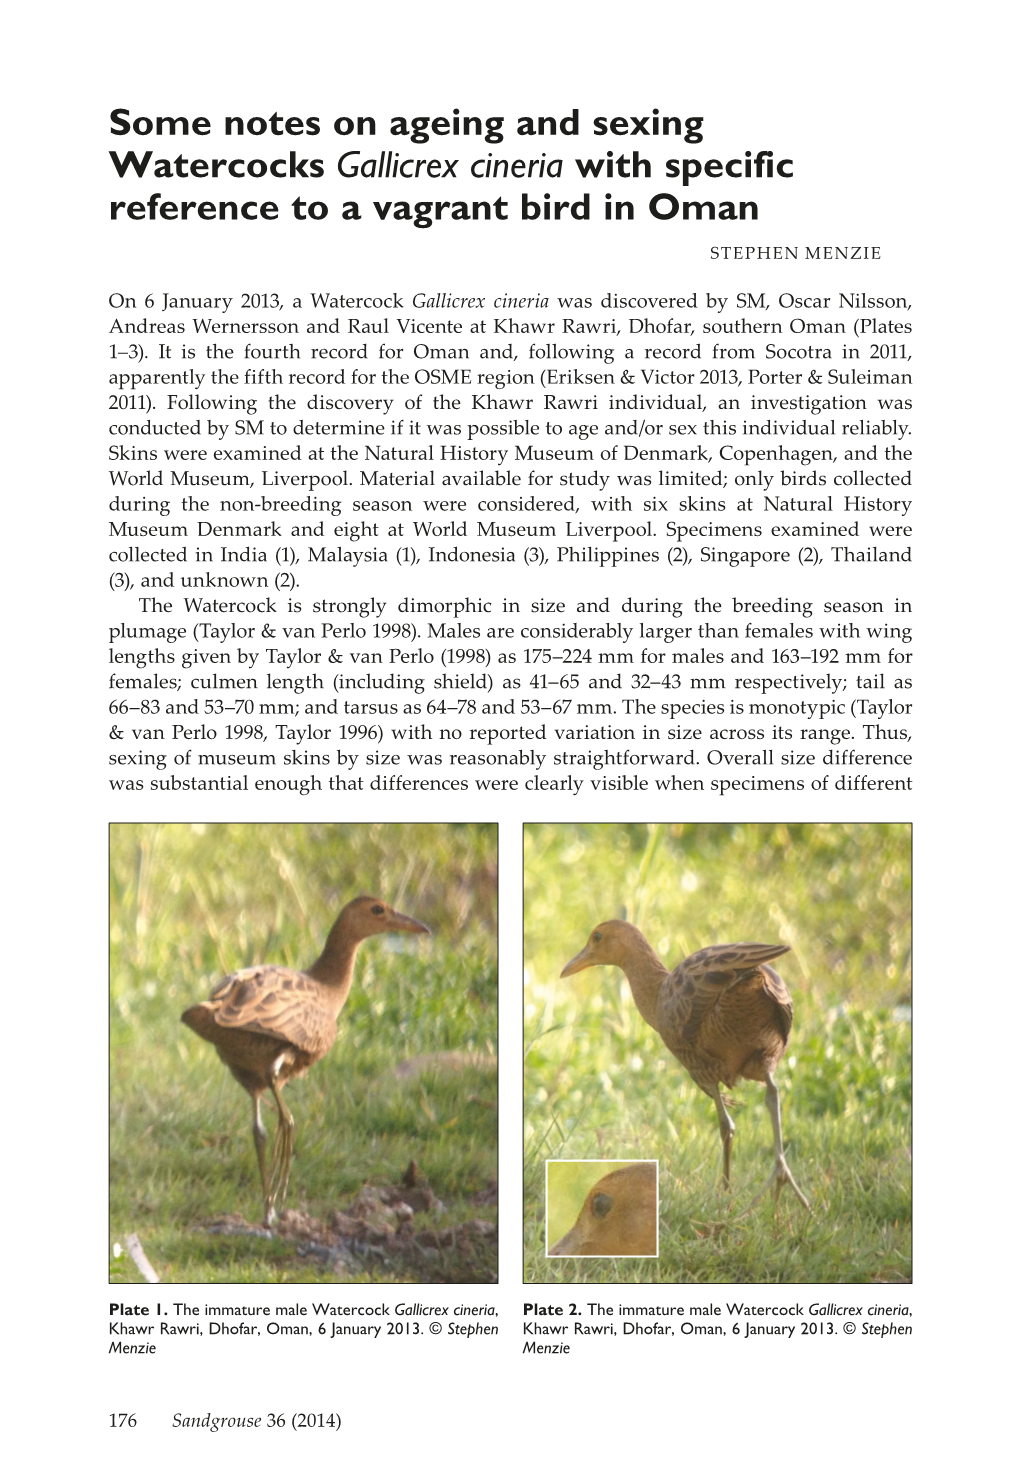 Some Notes on Ageing and Sexing Watercocks Gallicrex Cineria with Specific Reference to a Vagrant Bird in Oman STEPHEN MENZIE